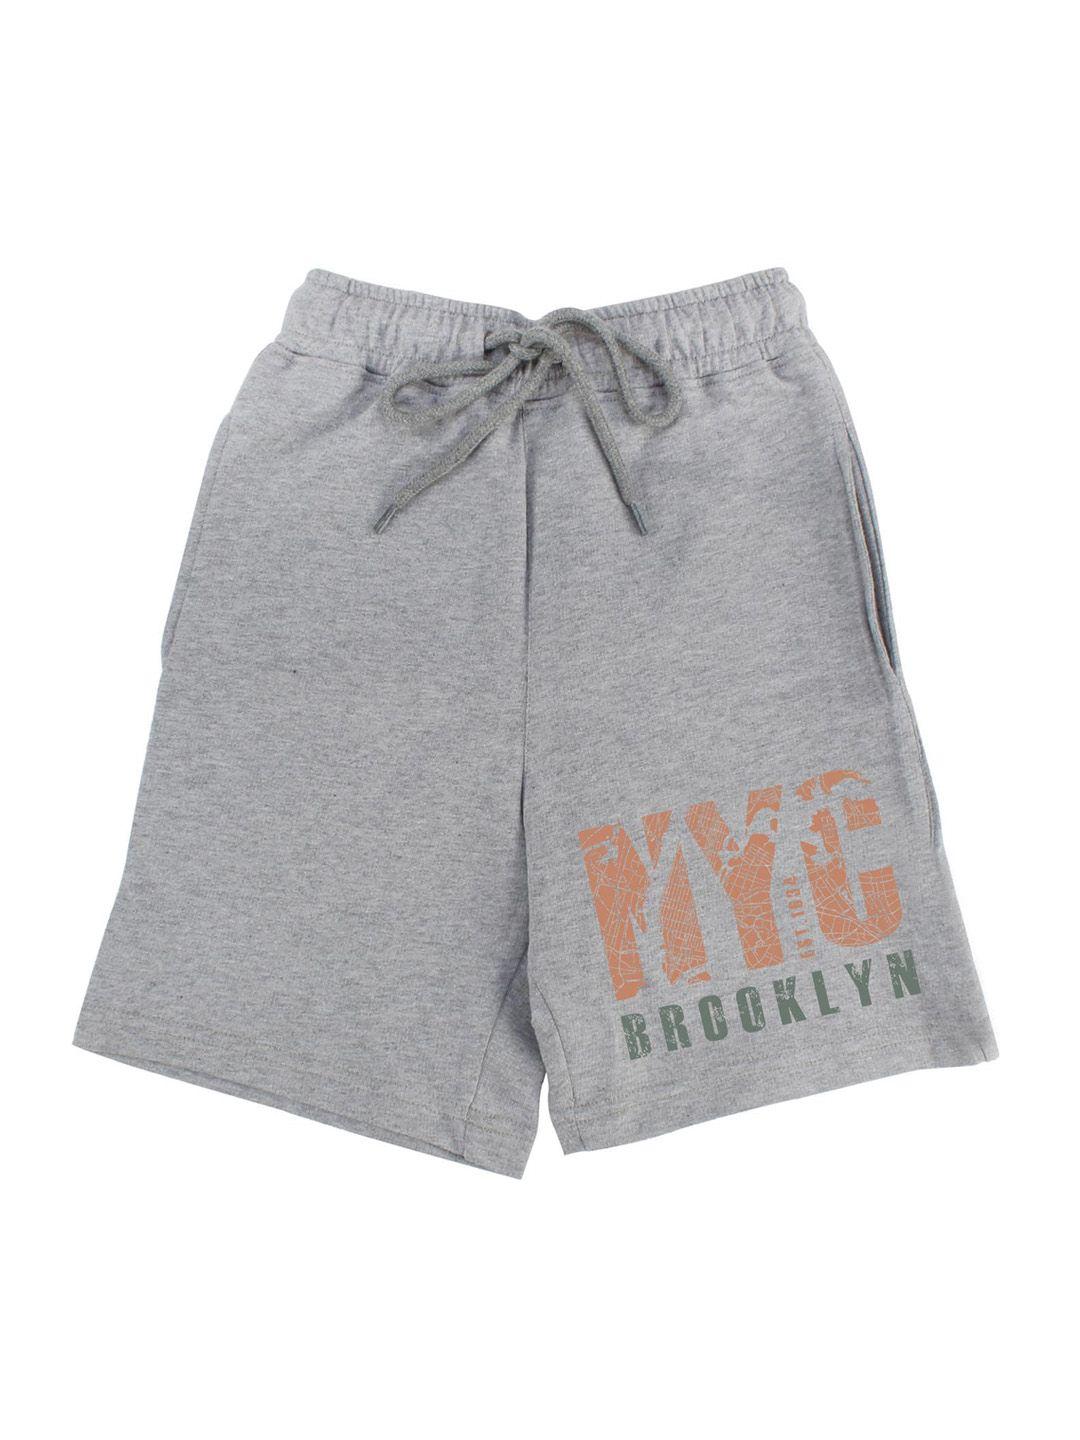 wear your mind boys grey typography printed shorts